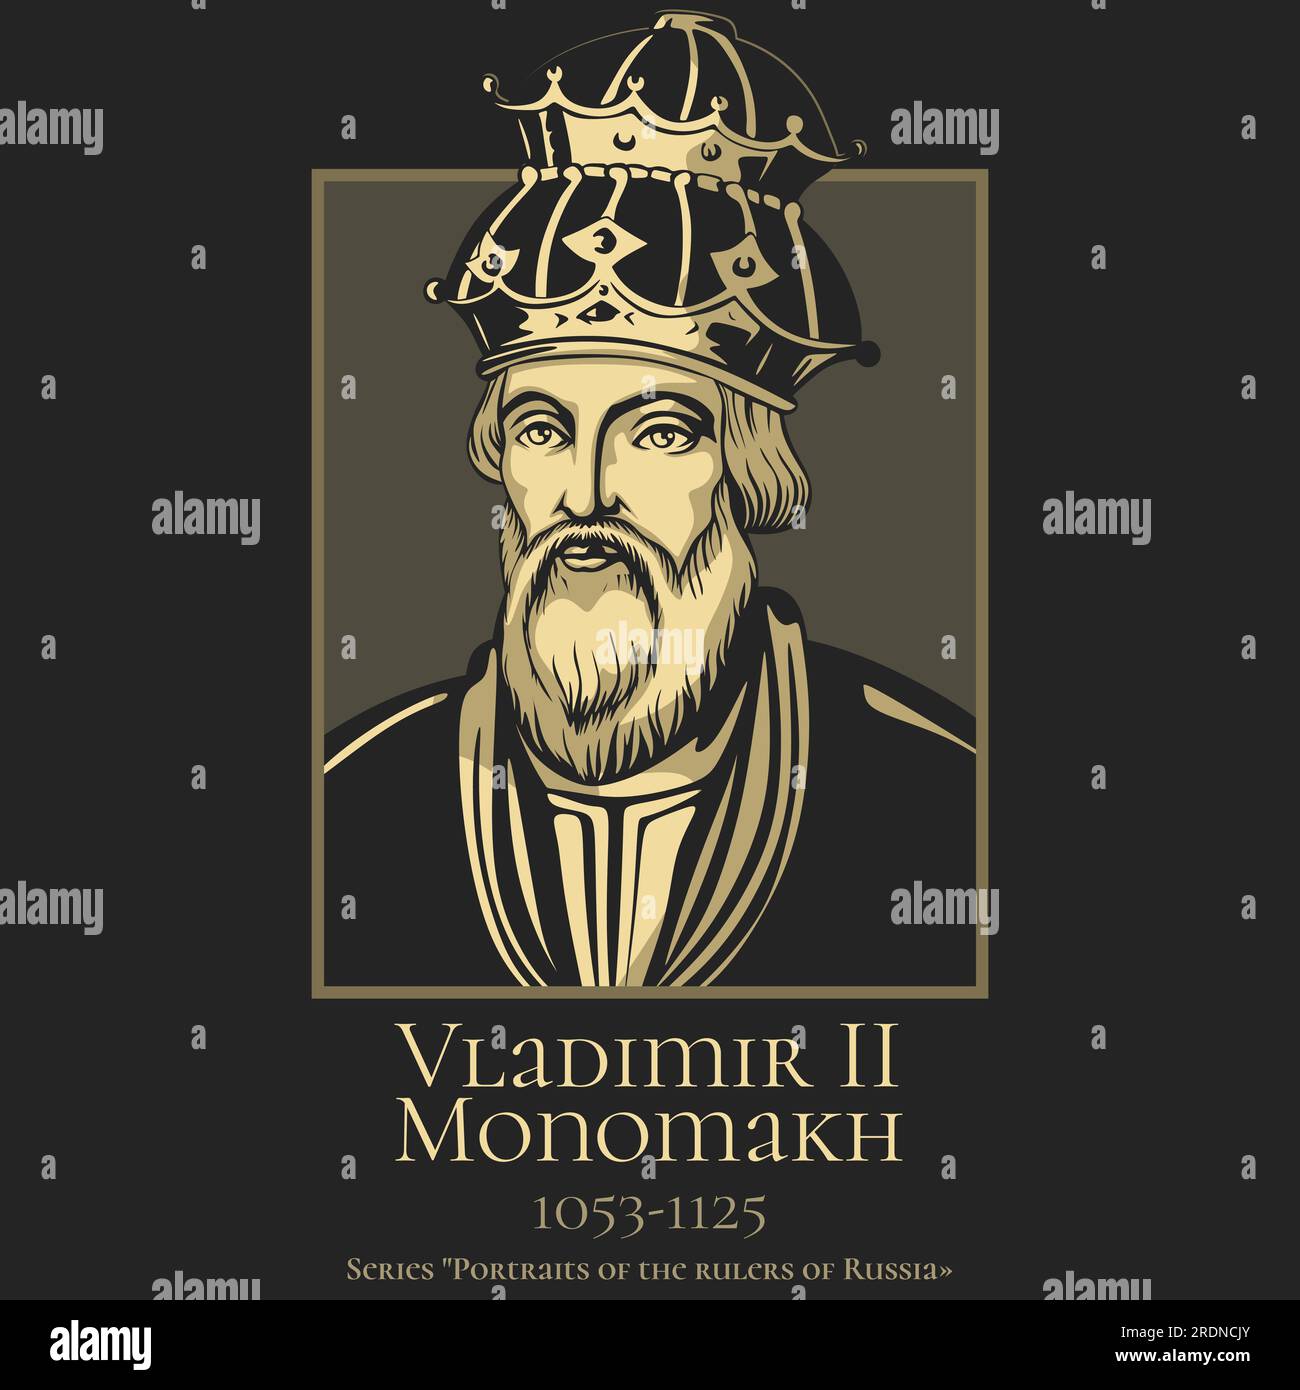 Portrait of the rulers of Russia. Vladimir II Monomakh (1053-1125) reigned as Grand Prince of the Medieval Rus from 1113 to 1125. Stock Vector